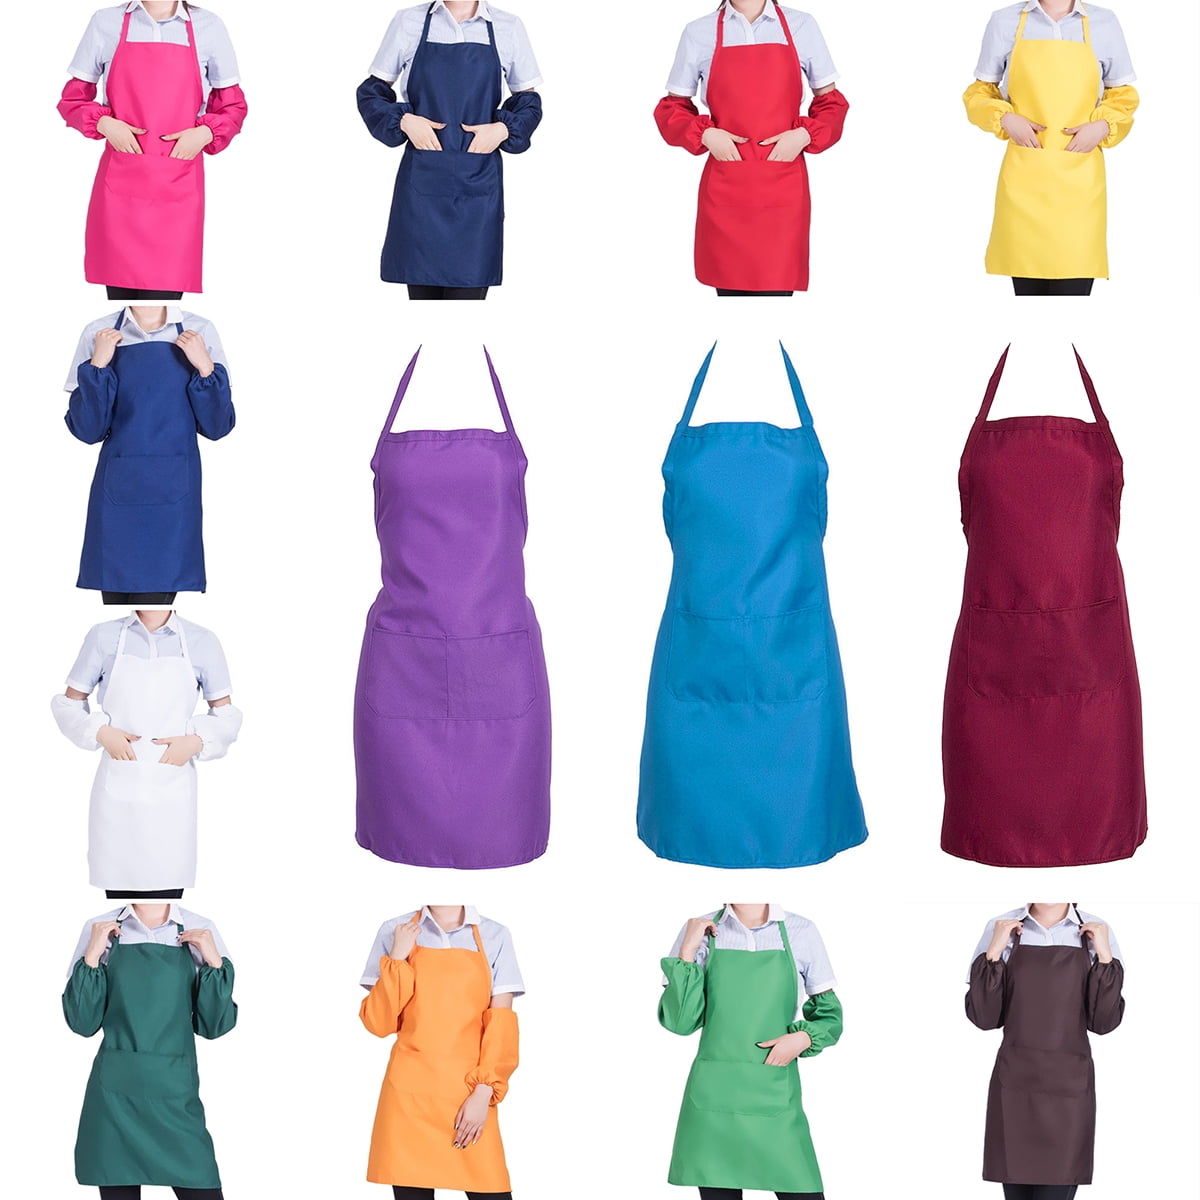 Uneek Premium Tabard Apron With Pocket Cleaning Catering Kitchen Health Care 